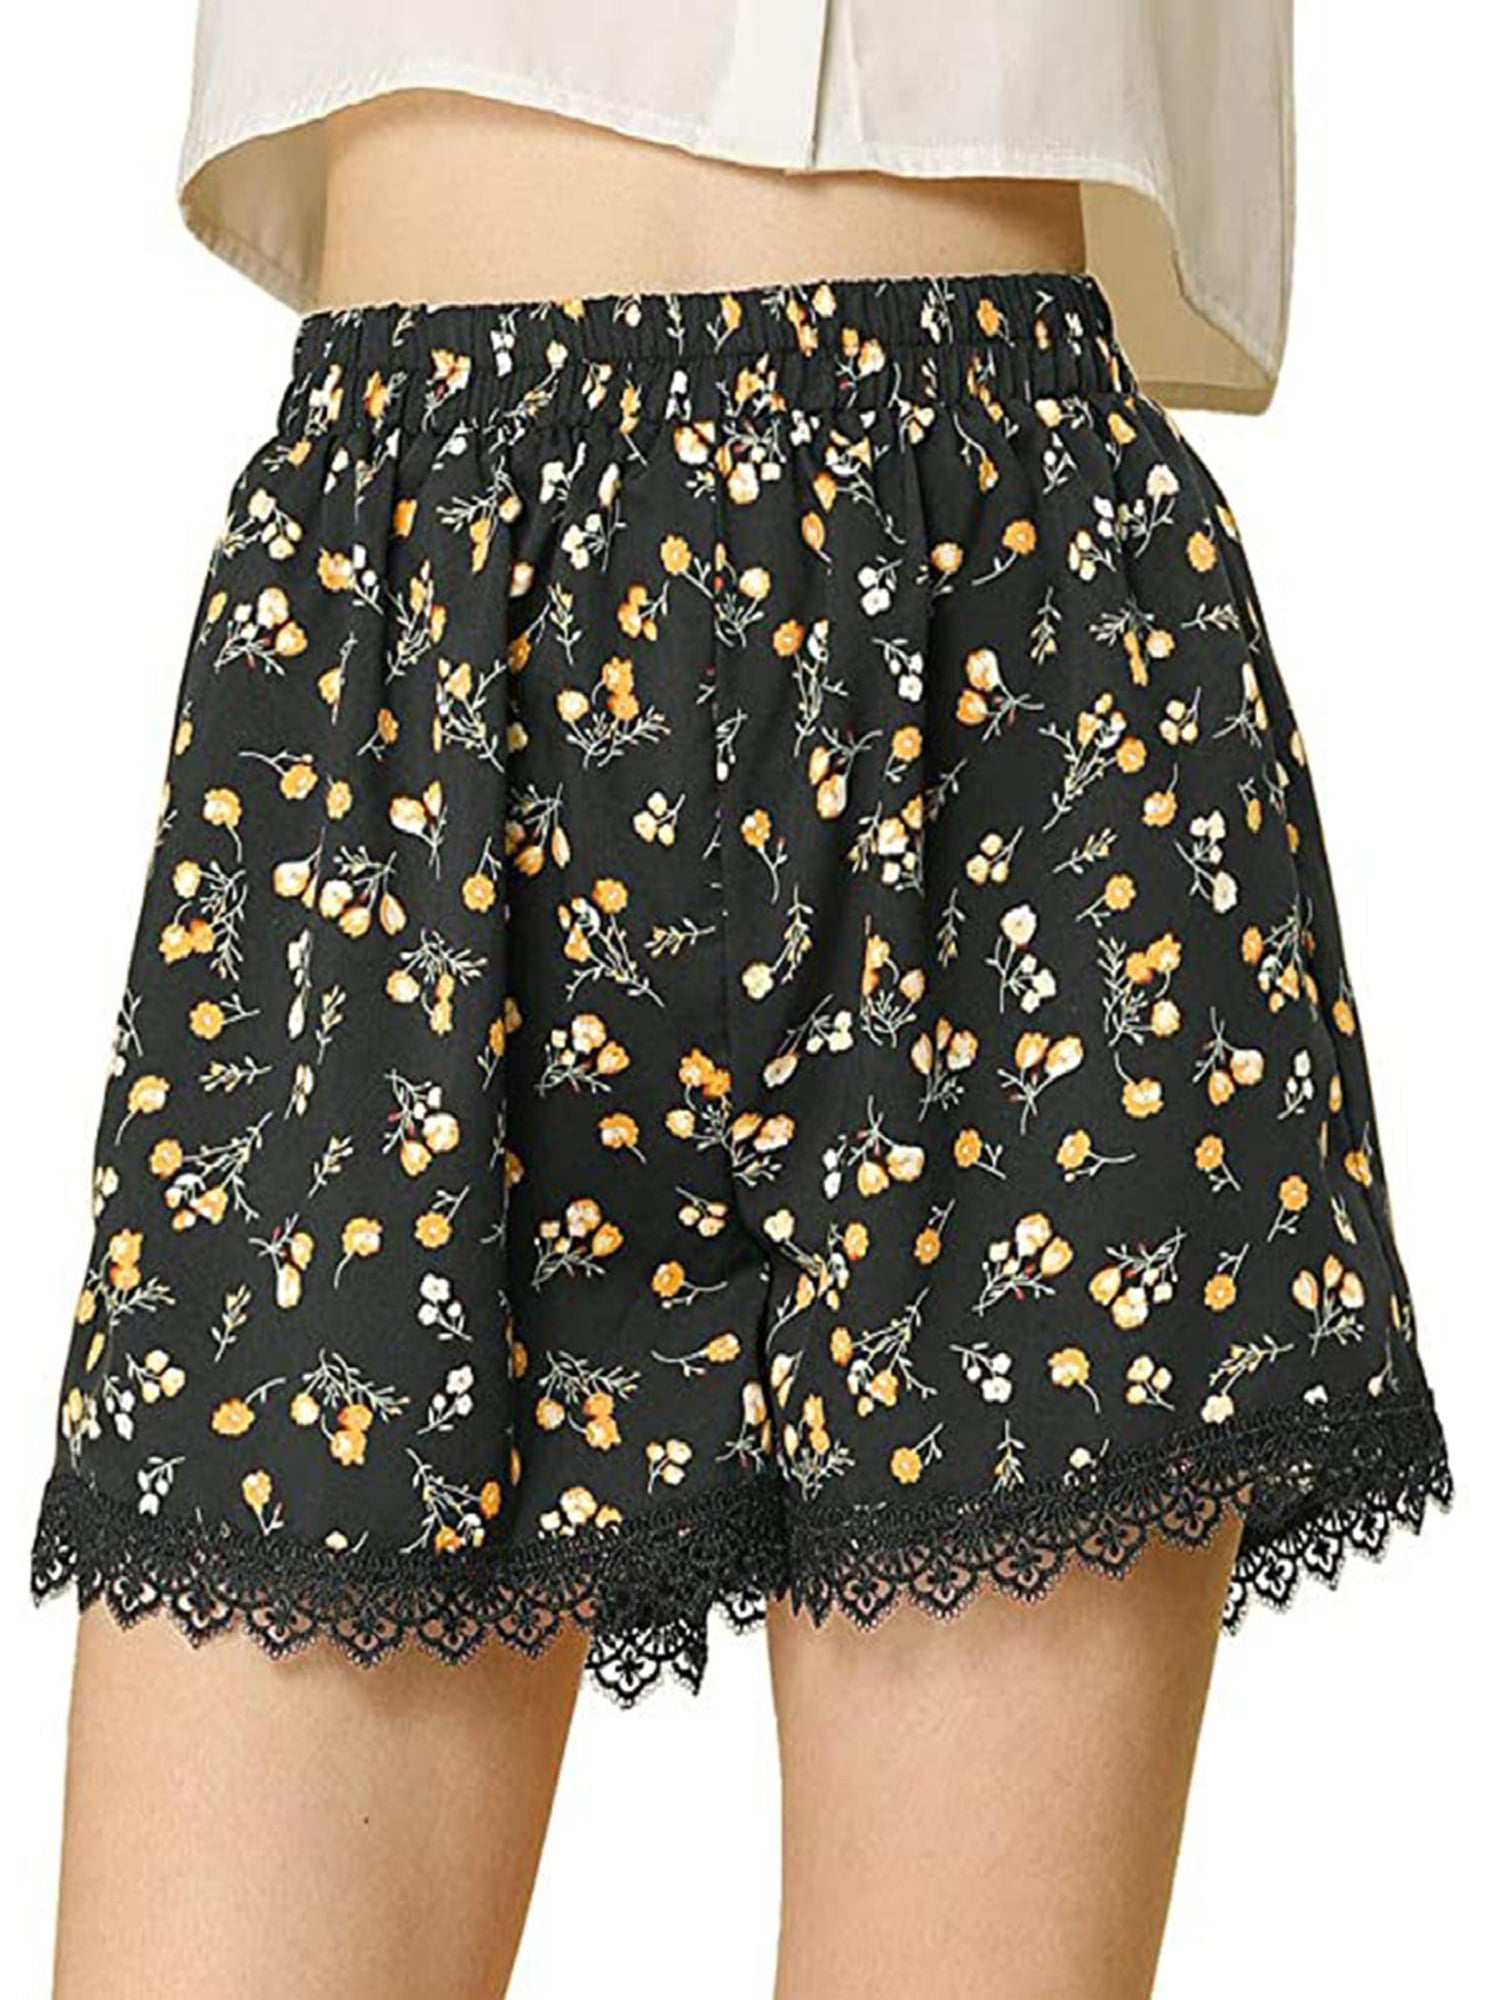 Fashion Short Trousers Hot Pants B.young Hot Pants black flower pattern casual look 